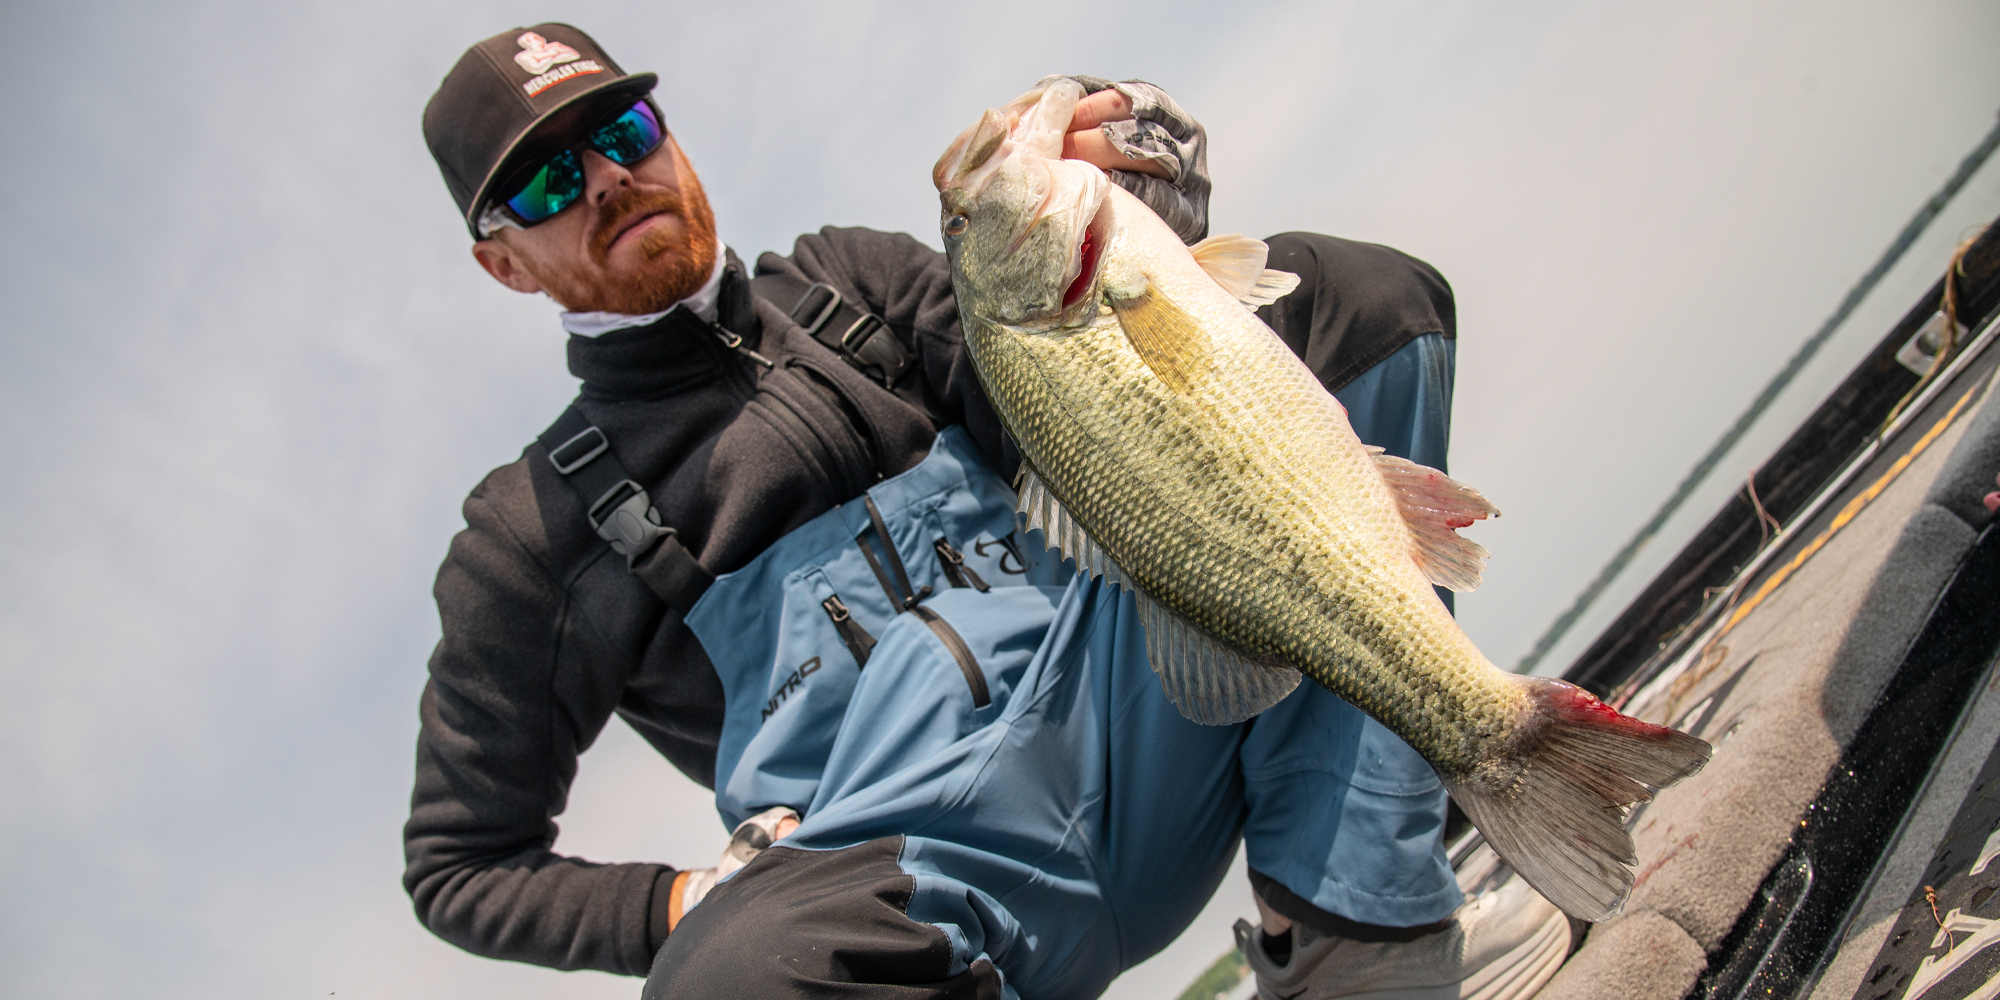 GALLERY: Practice makes perfect on Cayuga Lake - Major League Fishing